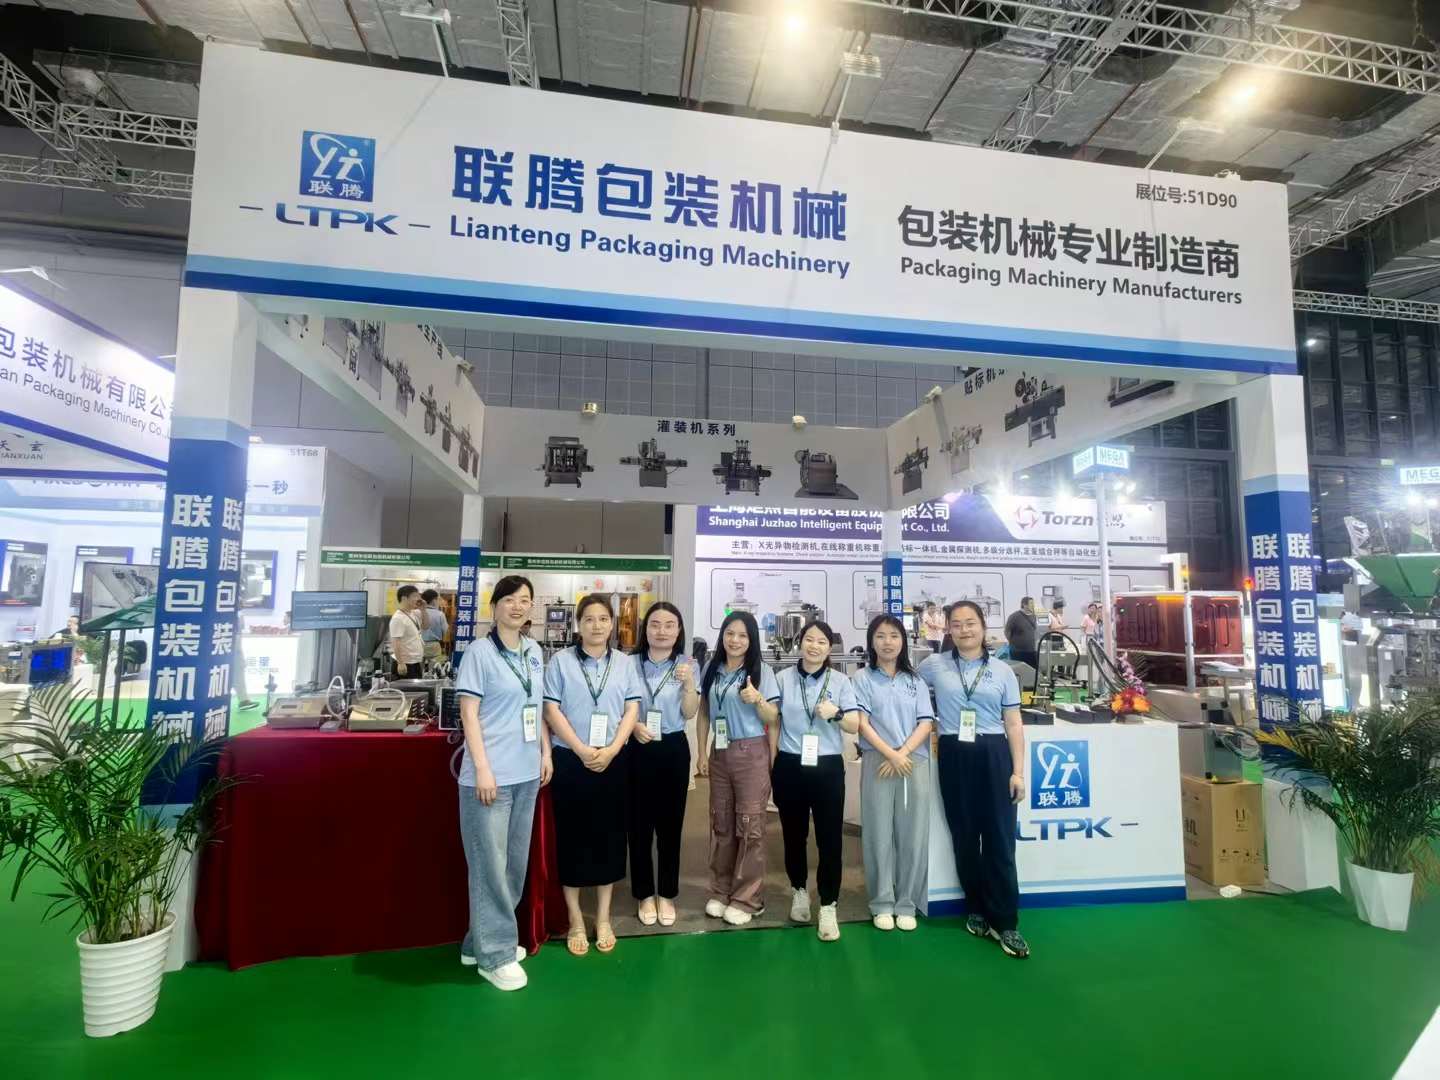 Welcome to visit our booth at Shanghai